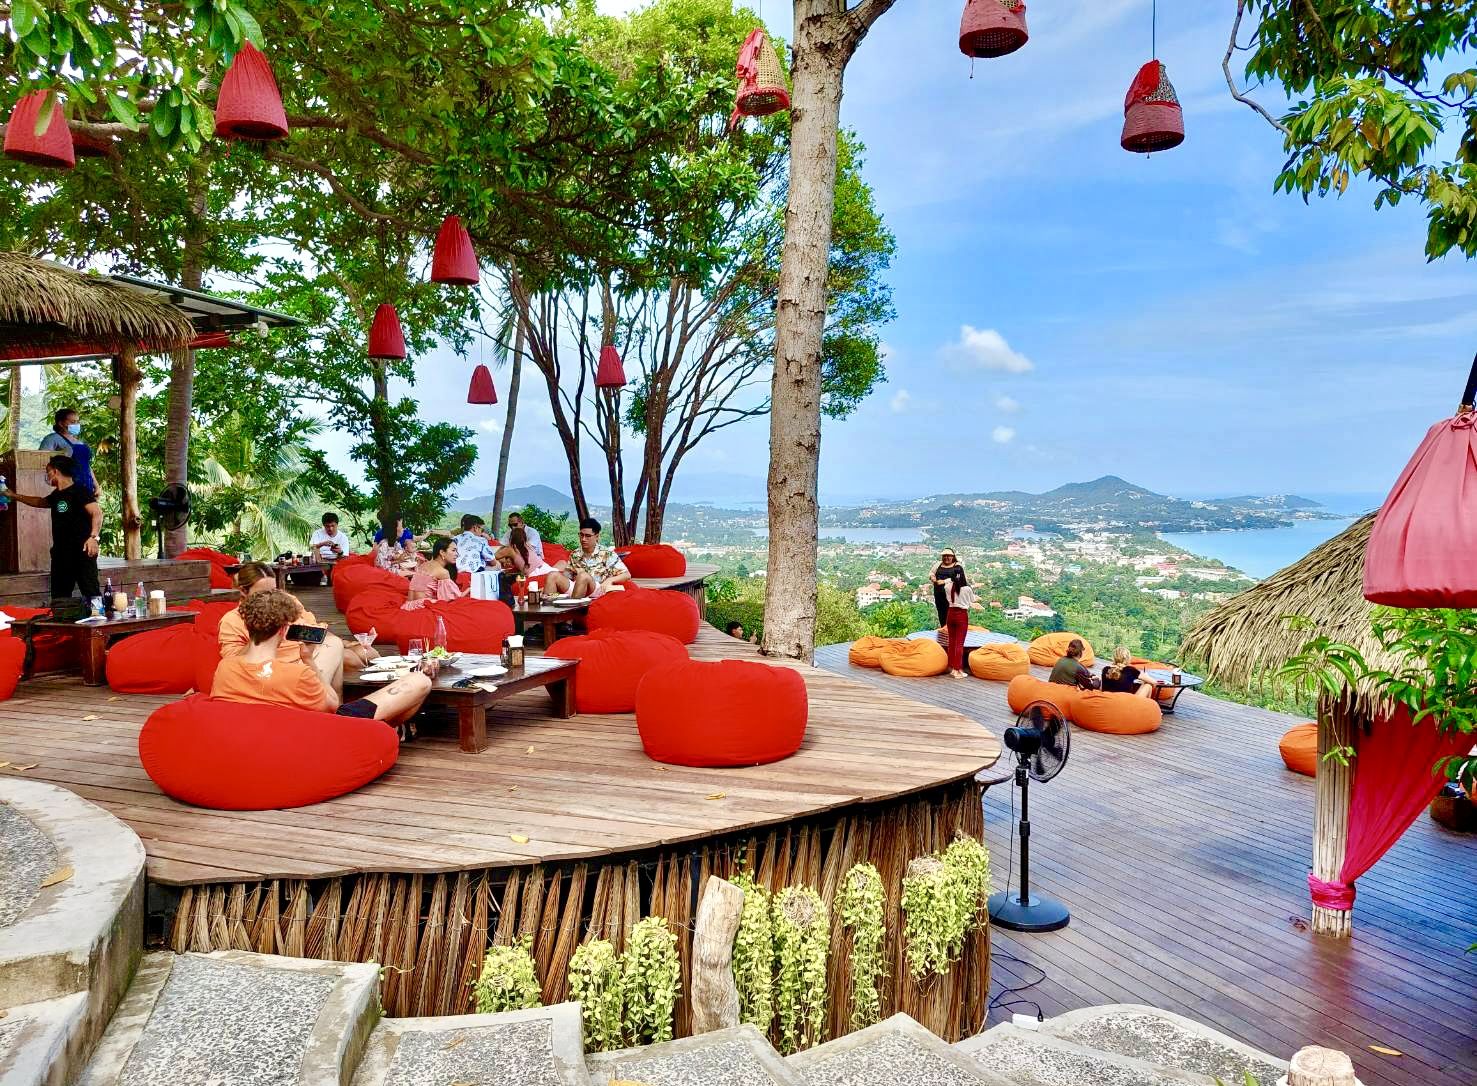 Koh Samui's Day-to-Night Delights: 4 Must-Hit Spots for Chill Vibes and Epic Parties!